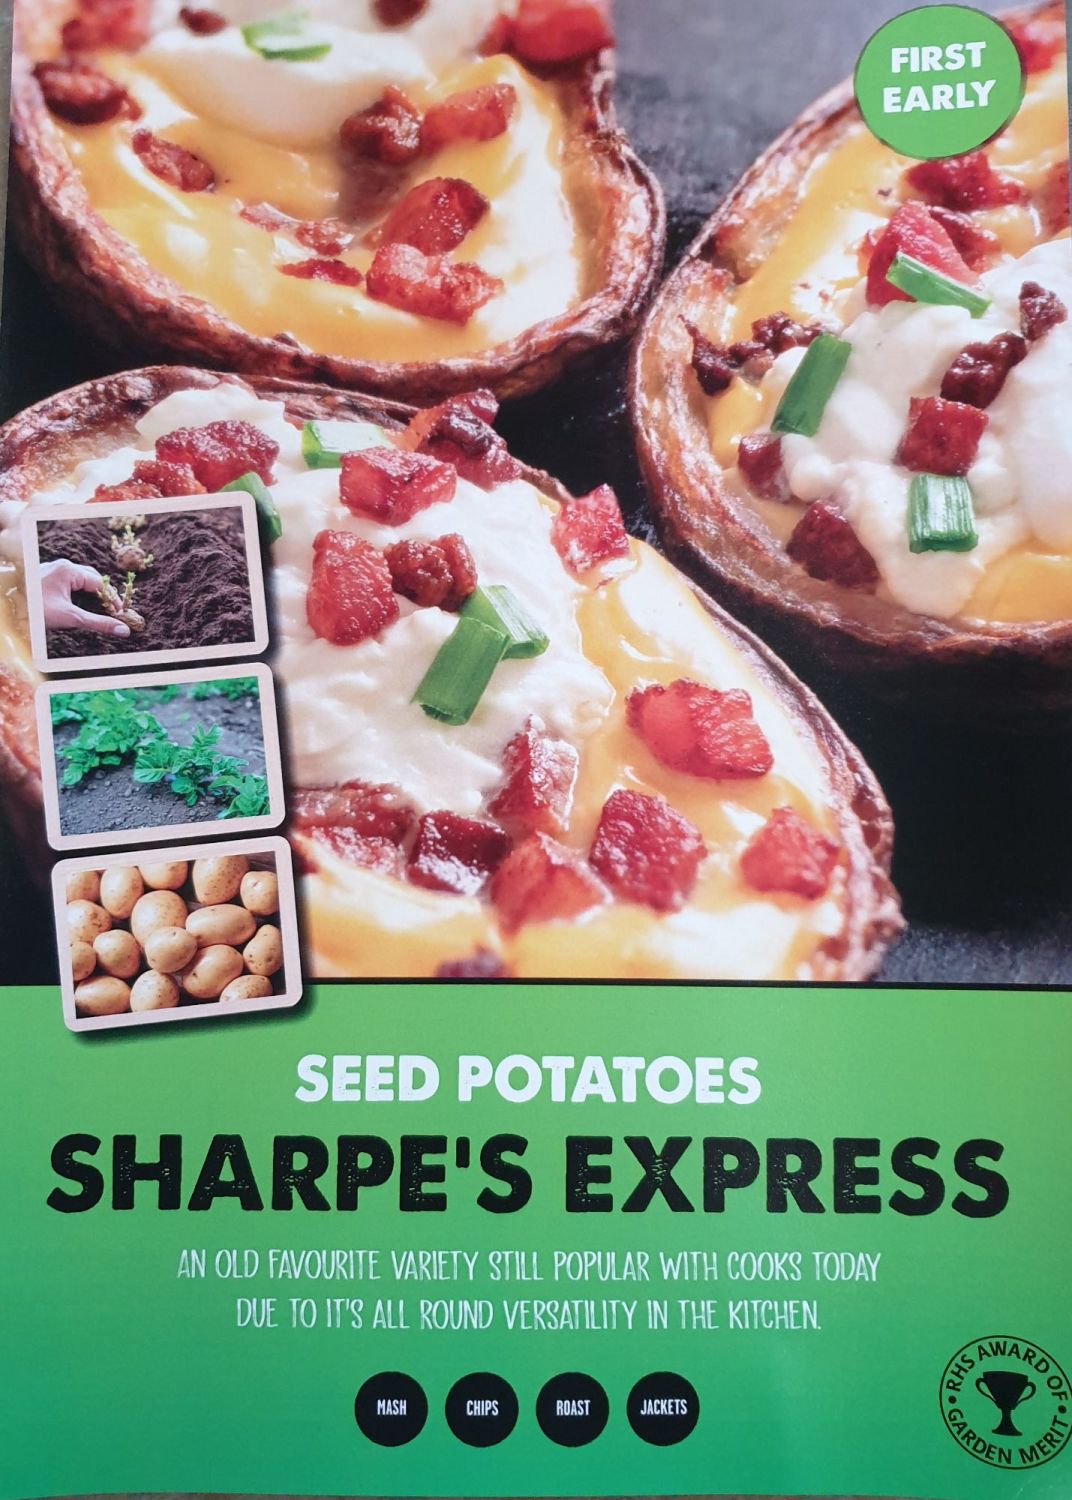 SHARPES EXPRESS 1st early seed potatoes